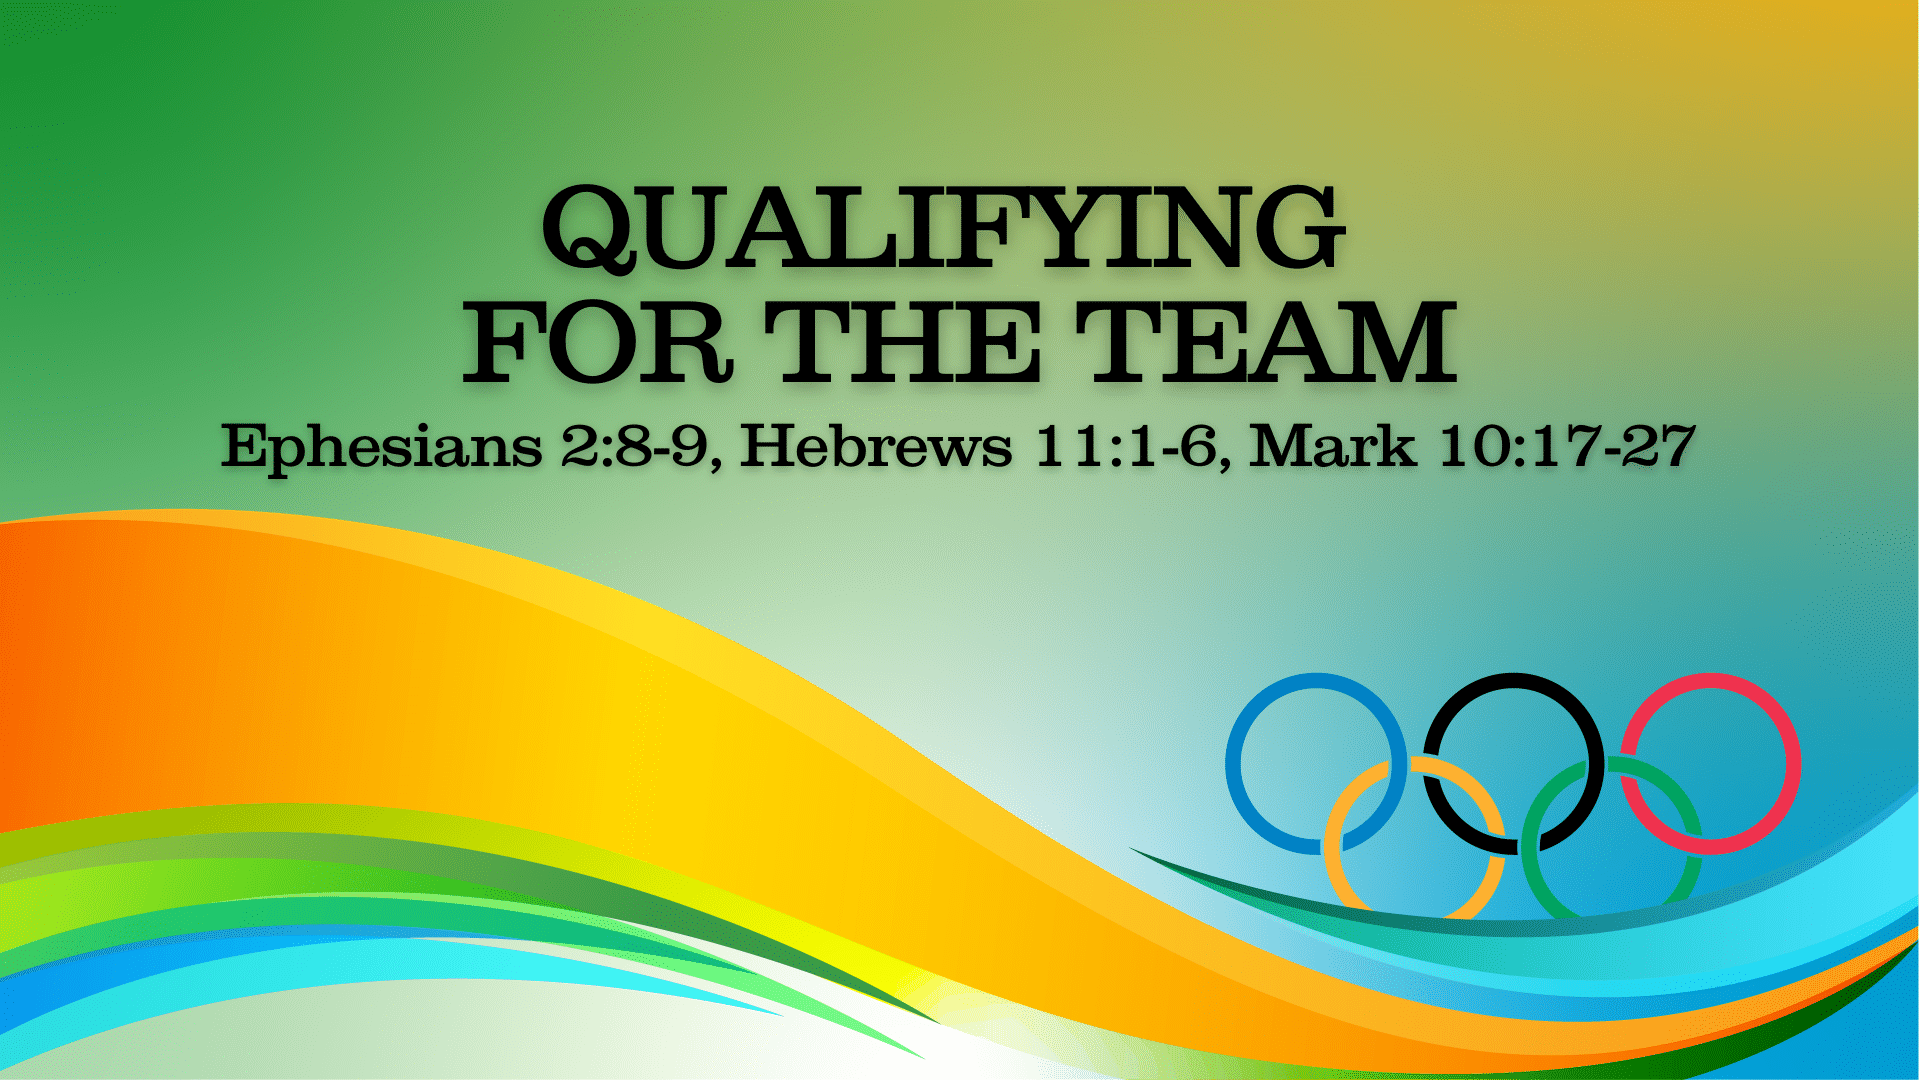 Go For The Gold: Qualifying For The Team